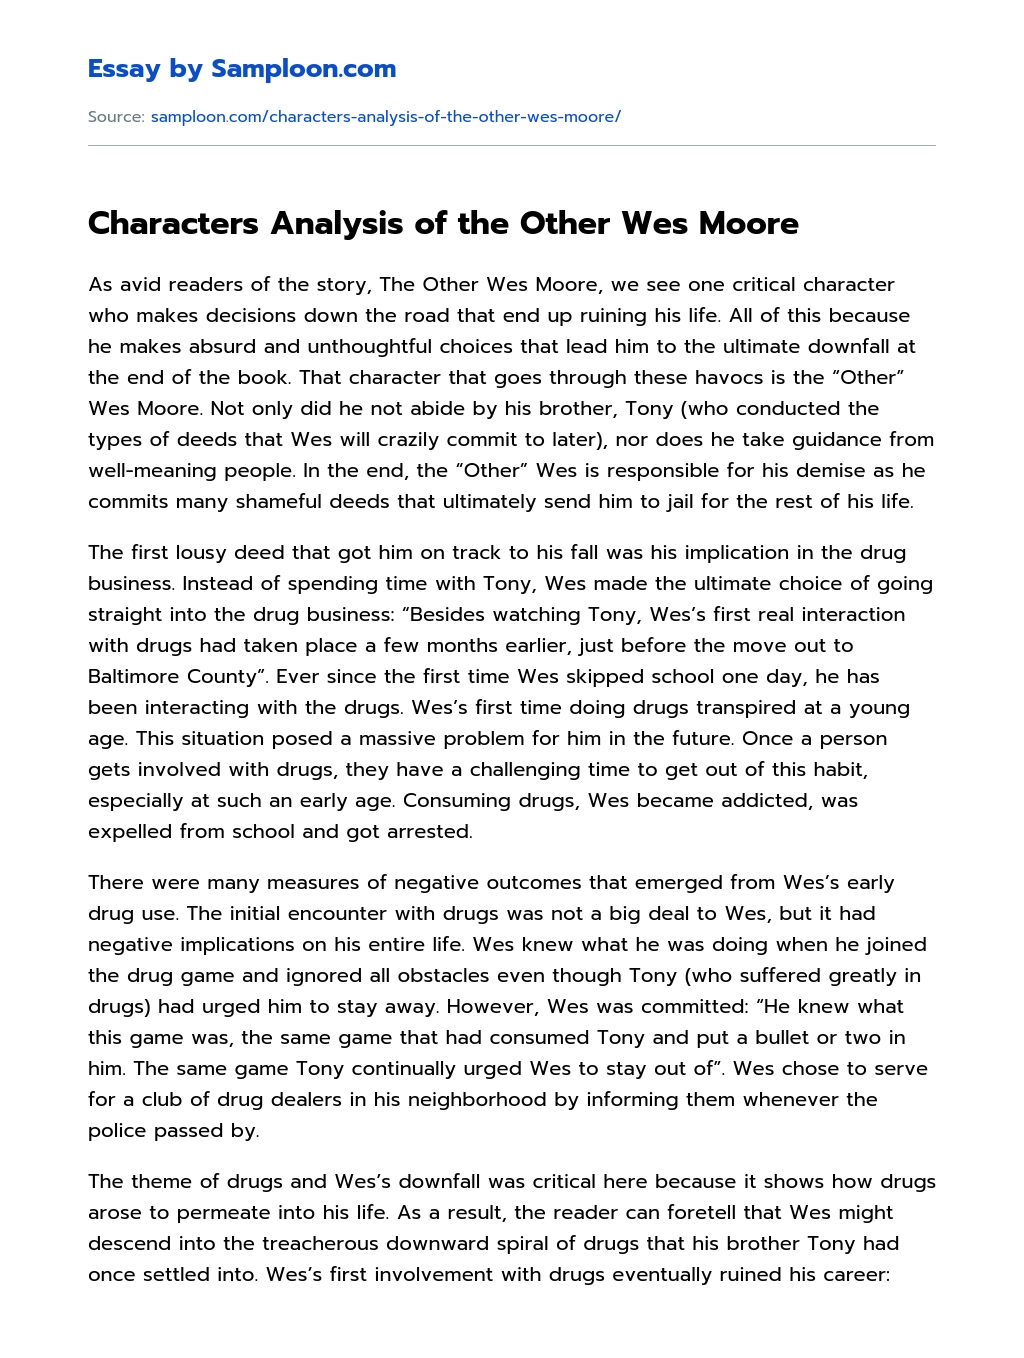 Characters Analysis of the Other Wes Moore essay